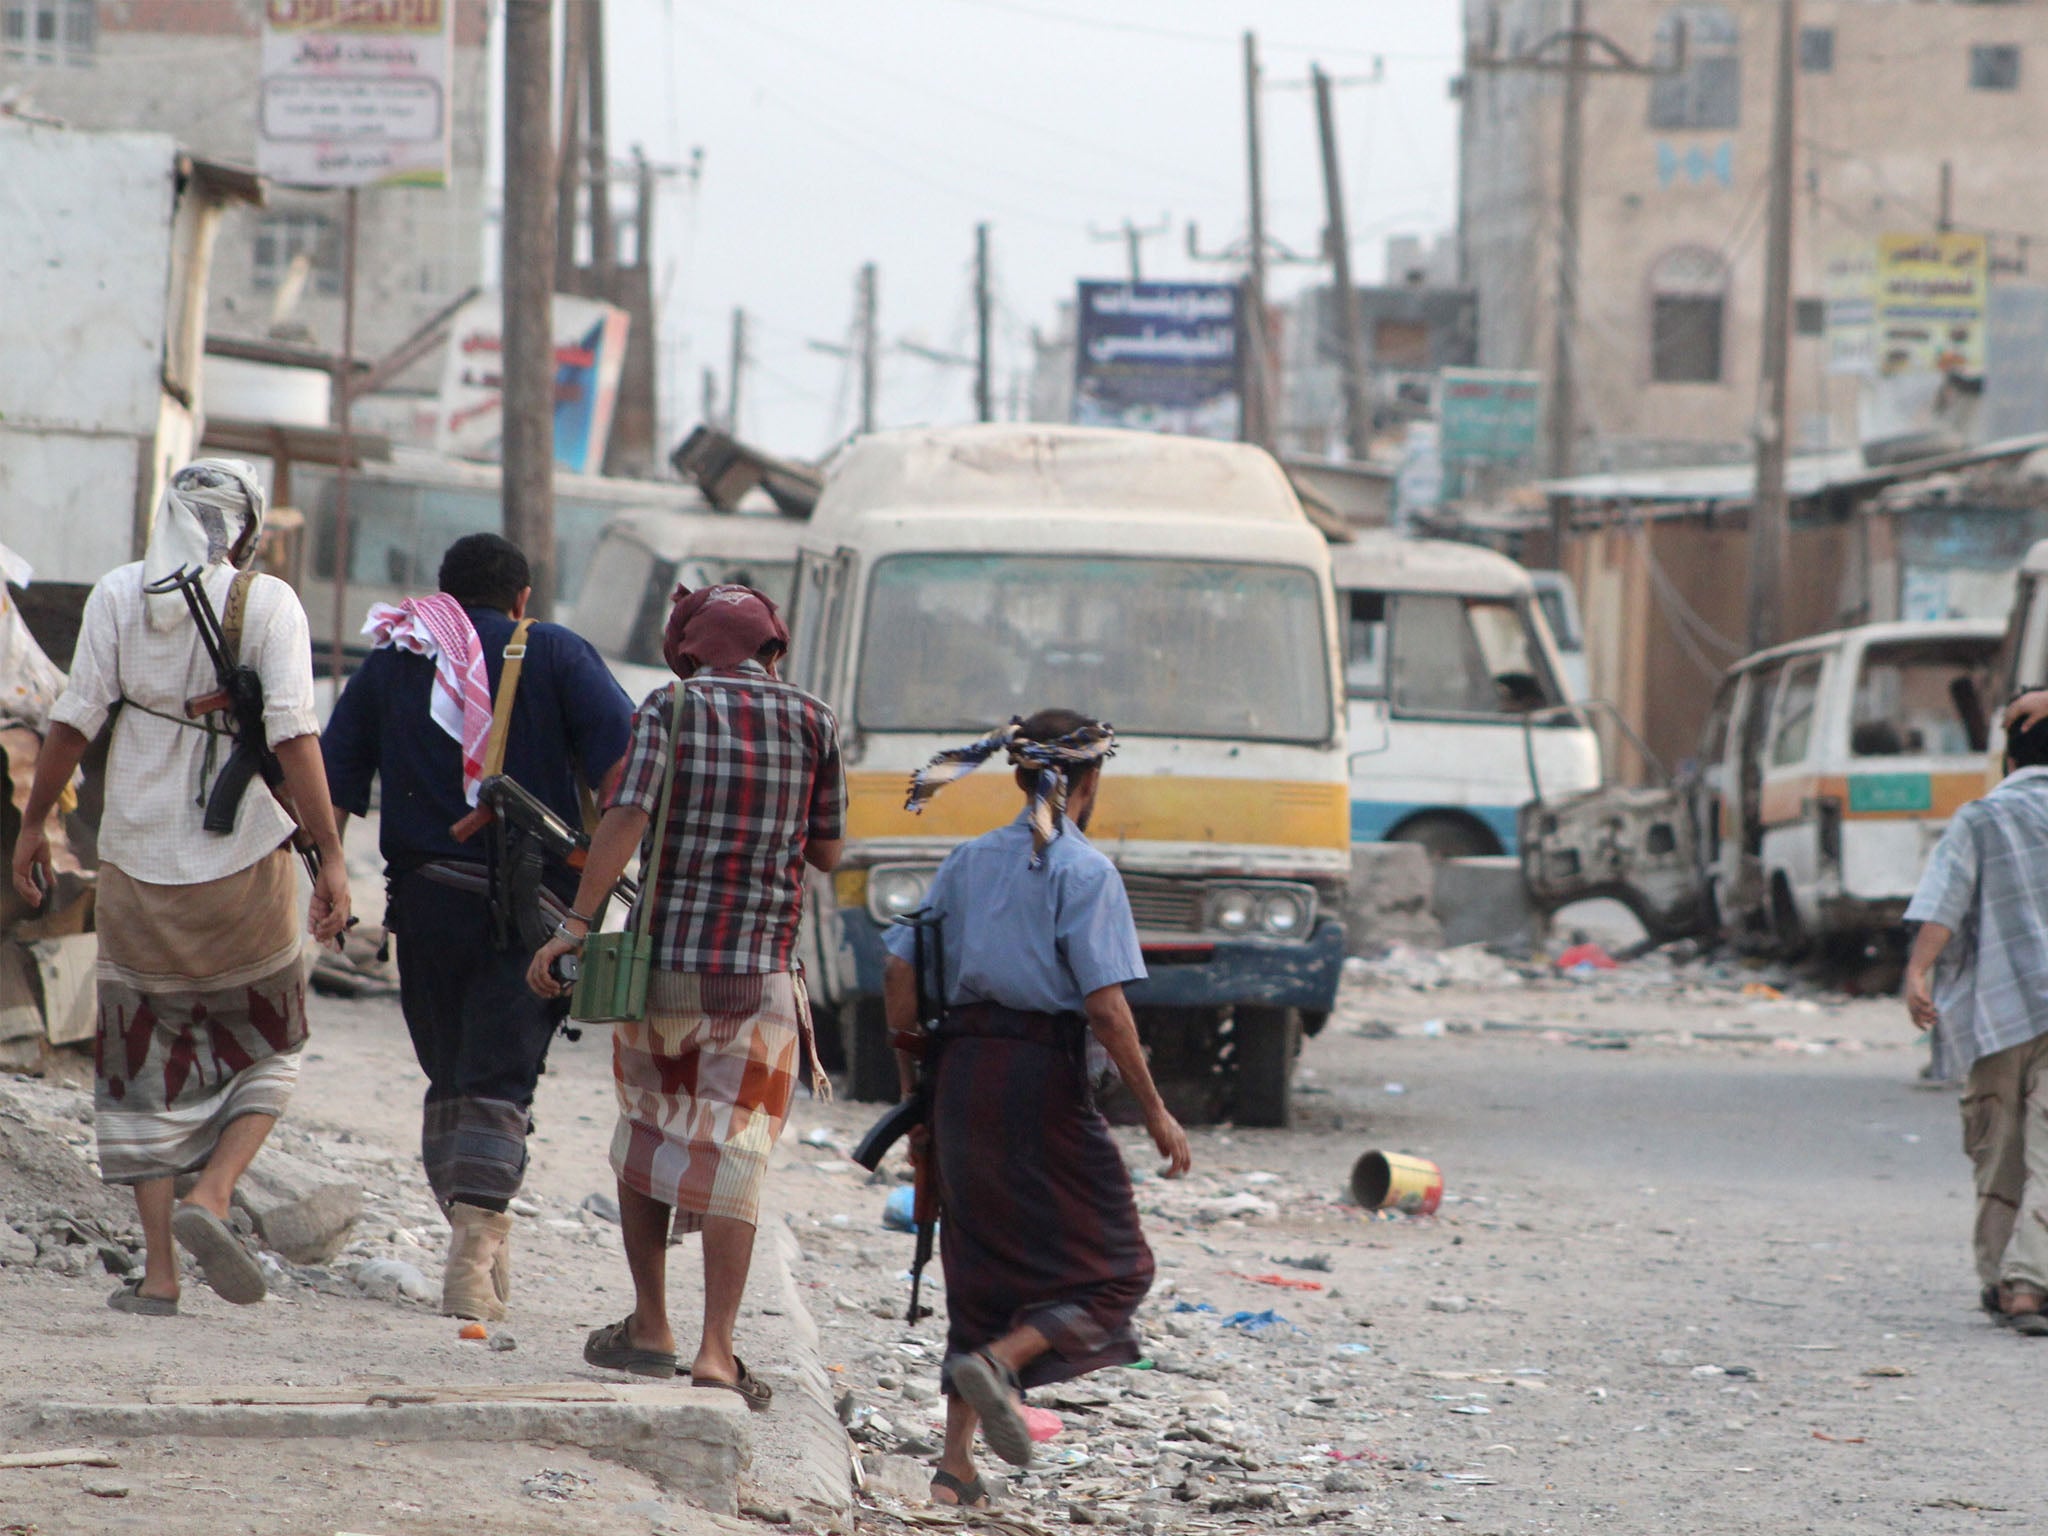 Yemeni fighters loyal to exiled President Abedrabbo Mansour Hadi walk on a damaged street in the Dar Saad suburb of the southern city of Aden on 2 July 2015.